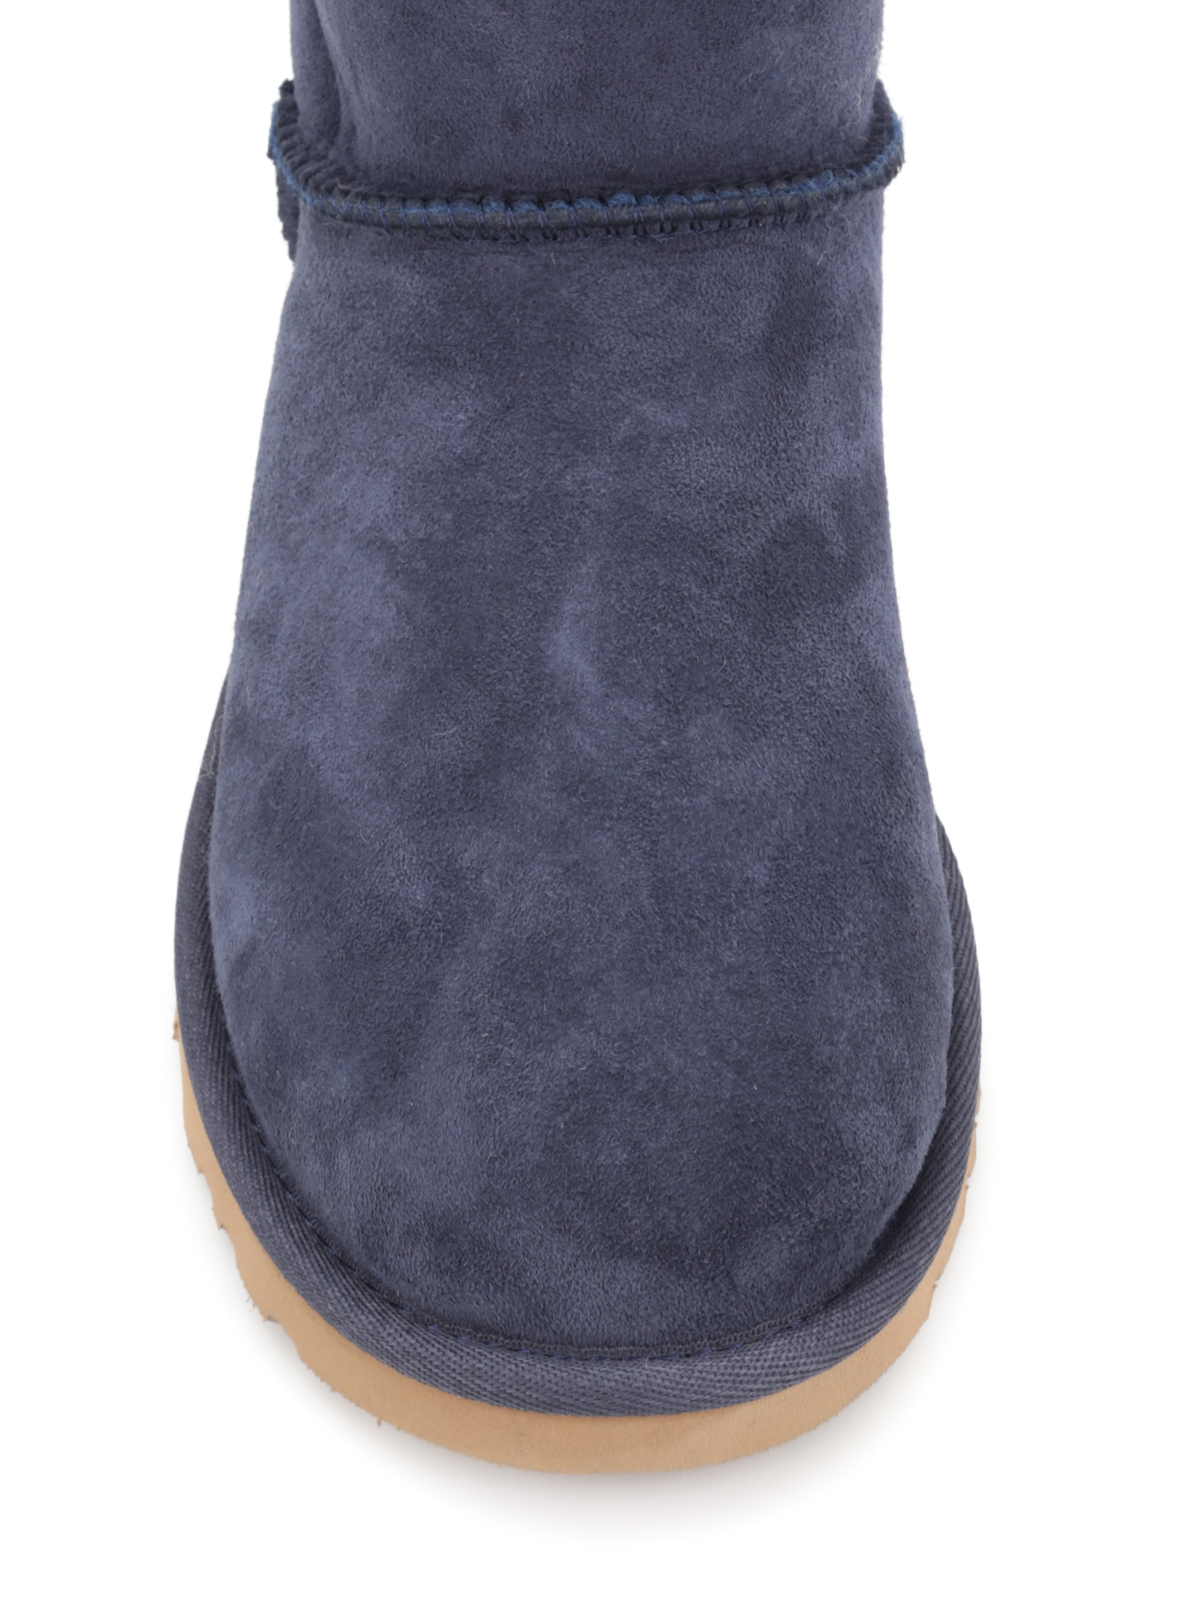 Hond Soms soms Respect Boots Ugg - Mini Bailey bow - 1005062WNAVY | Shop online at iKRIX